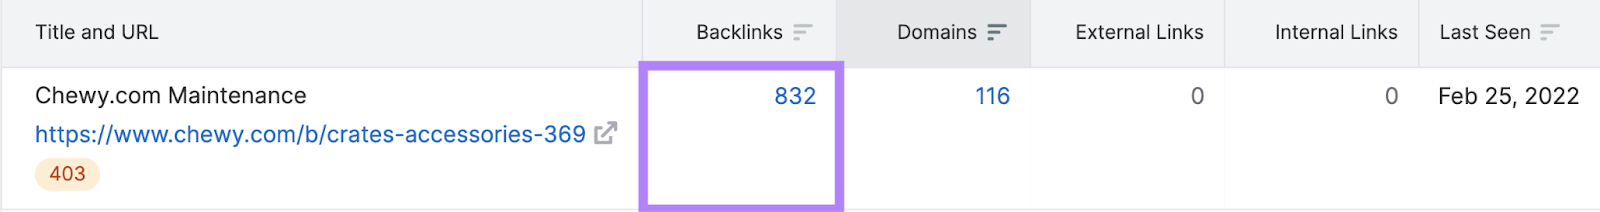 Backlinks number highlighted, in this case there are 832 backlinks to this broken page